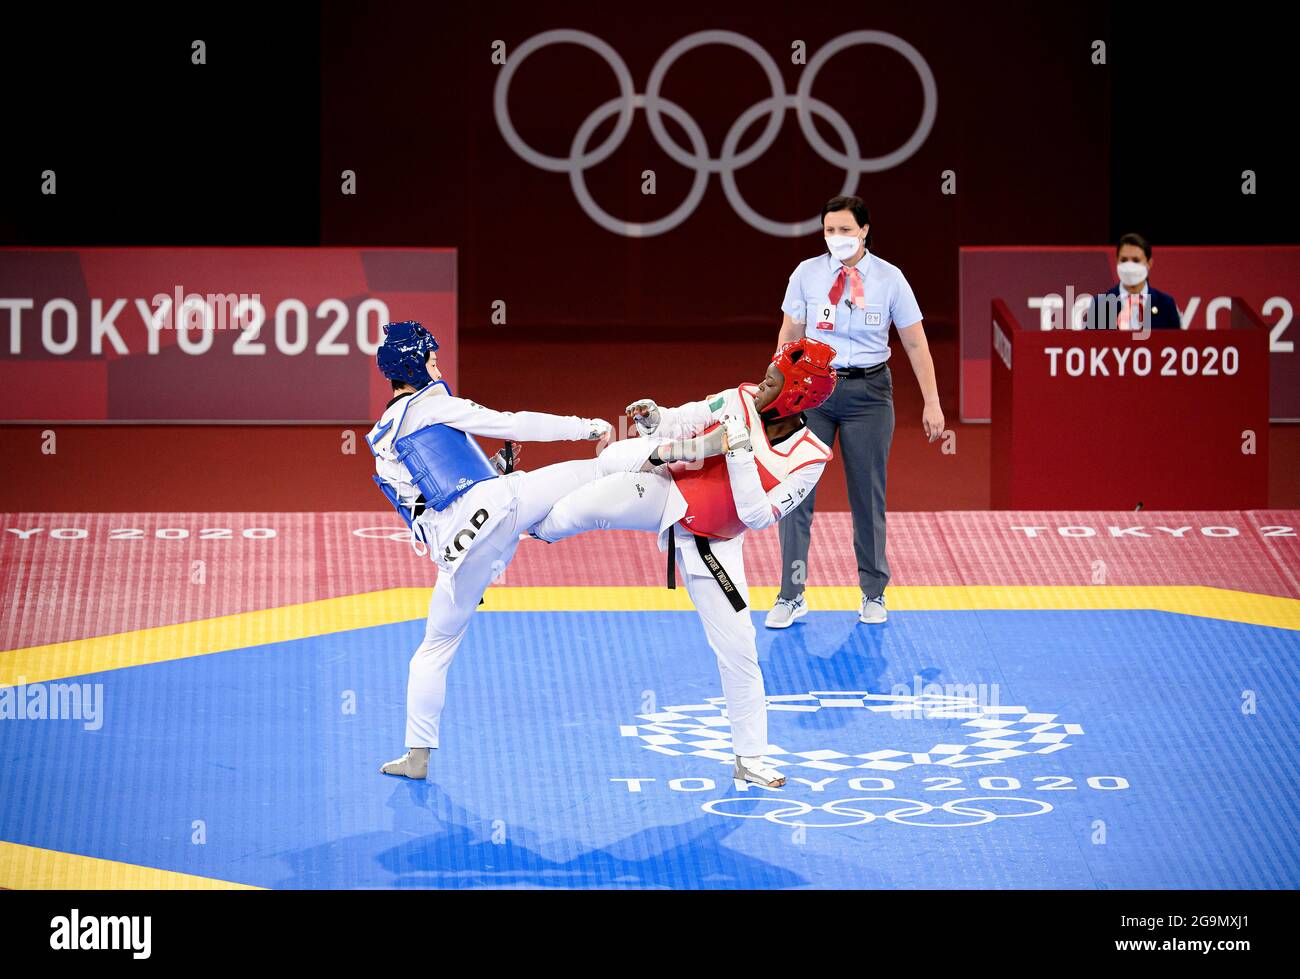 Dabin LEE (KOR), left, versus vs. Aminata Charlene TRAORE (CIV), action, Dabin LEE (KOR), blue, versus vs. Aminata Charlene TRAORE (CIV), red, 17:13, Taekwondo women + 67kg, 1 / 8 Final, Women + 67kg Round of 16, on July 27th, 2021 Summer Olympics 2020, from July 23rd. - 08.08.2021 in Tokyo / Japan. Stock Photo